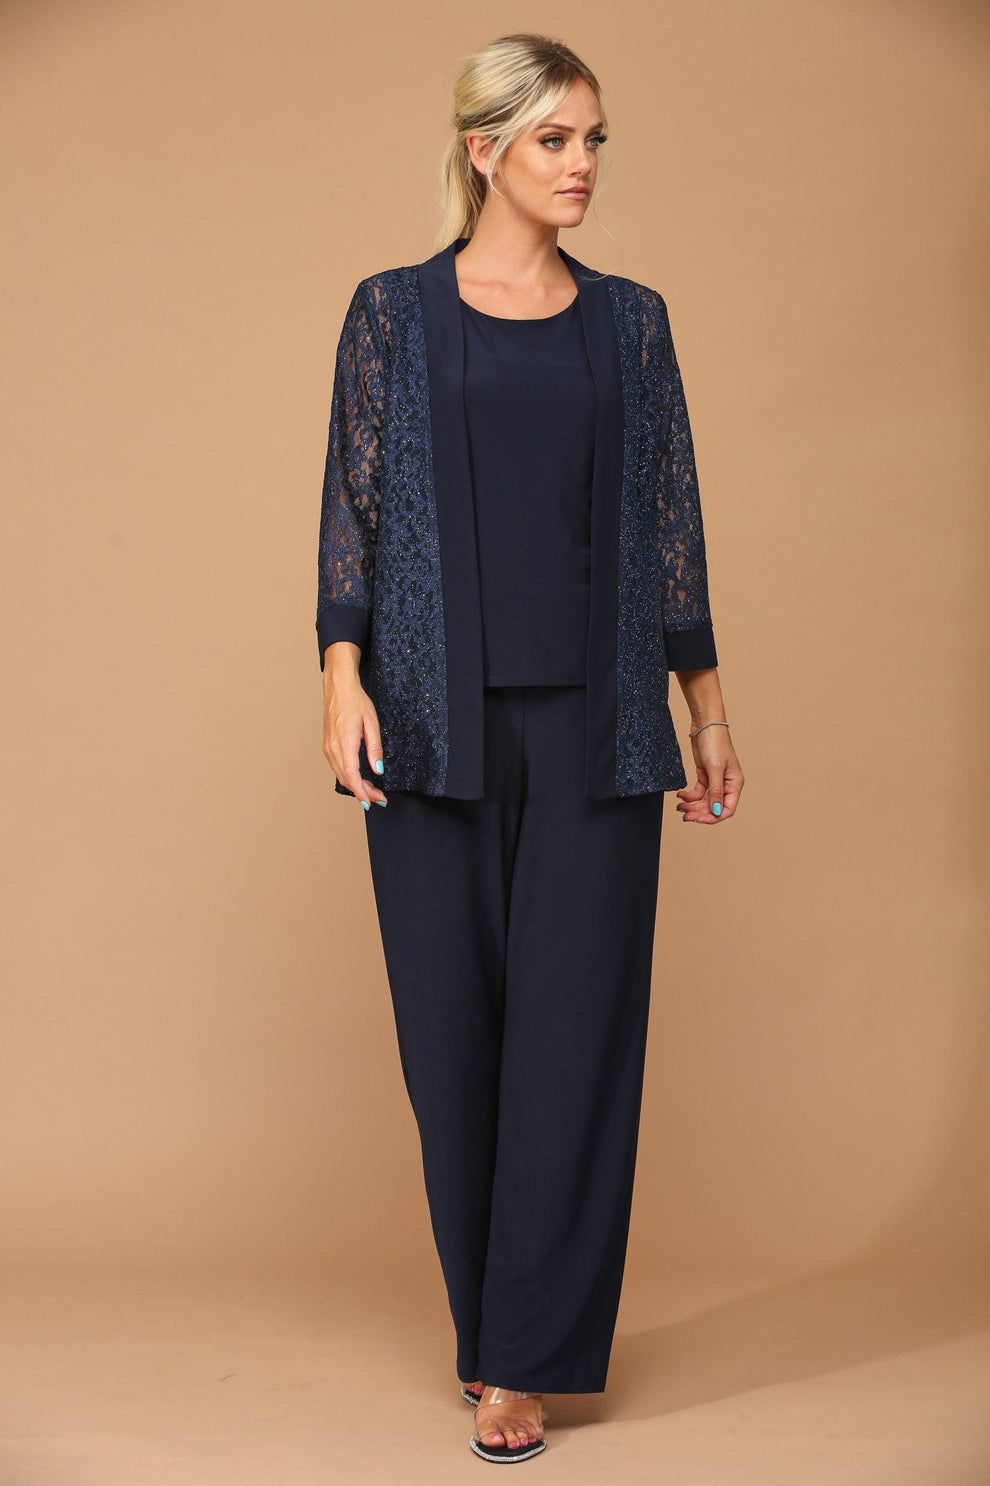 Long Formal Mother of the Bride Jacket Pant Suit for $84.99 – The Dress ...